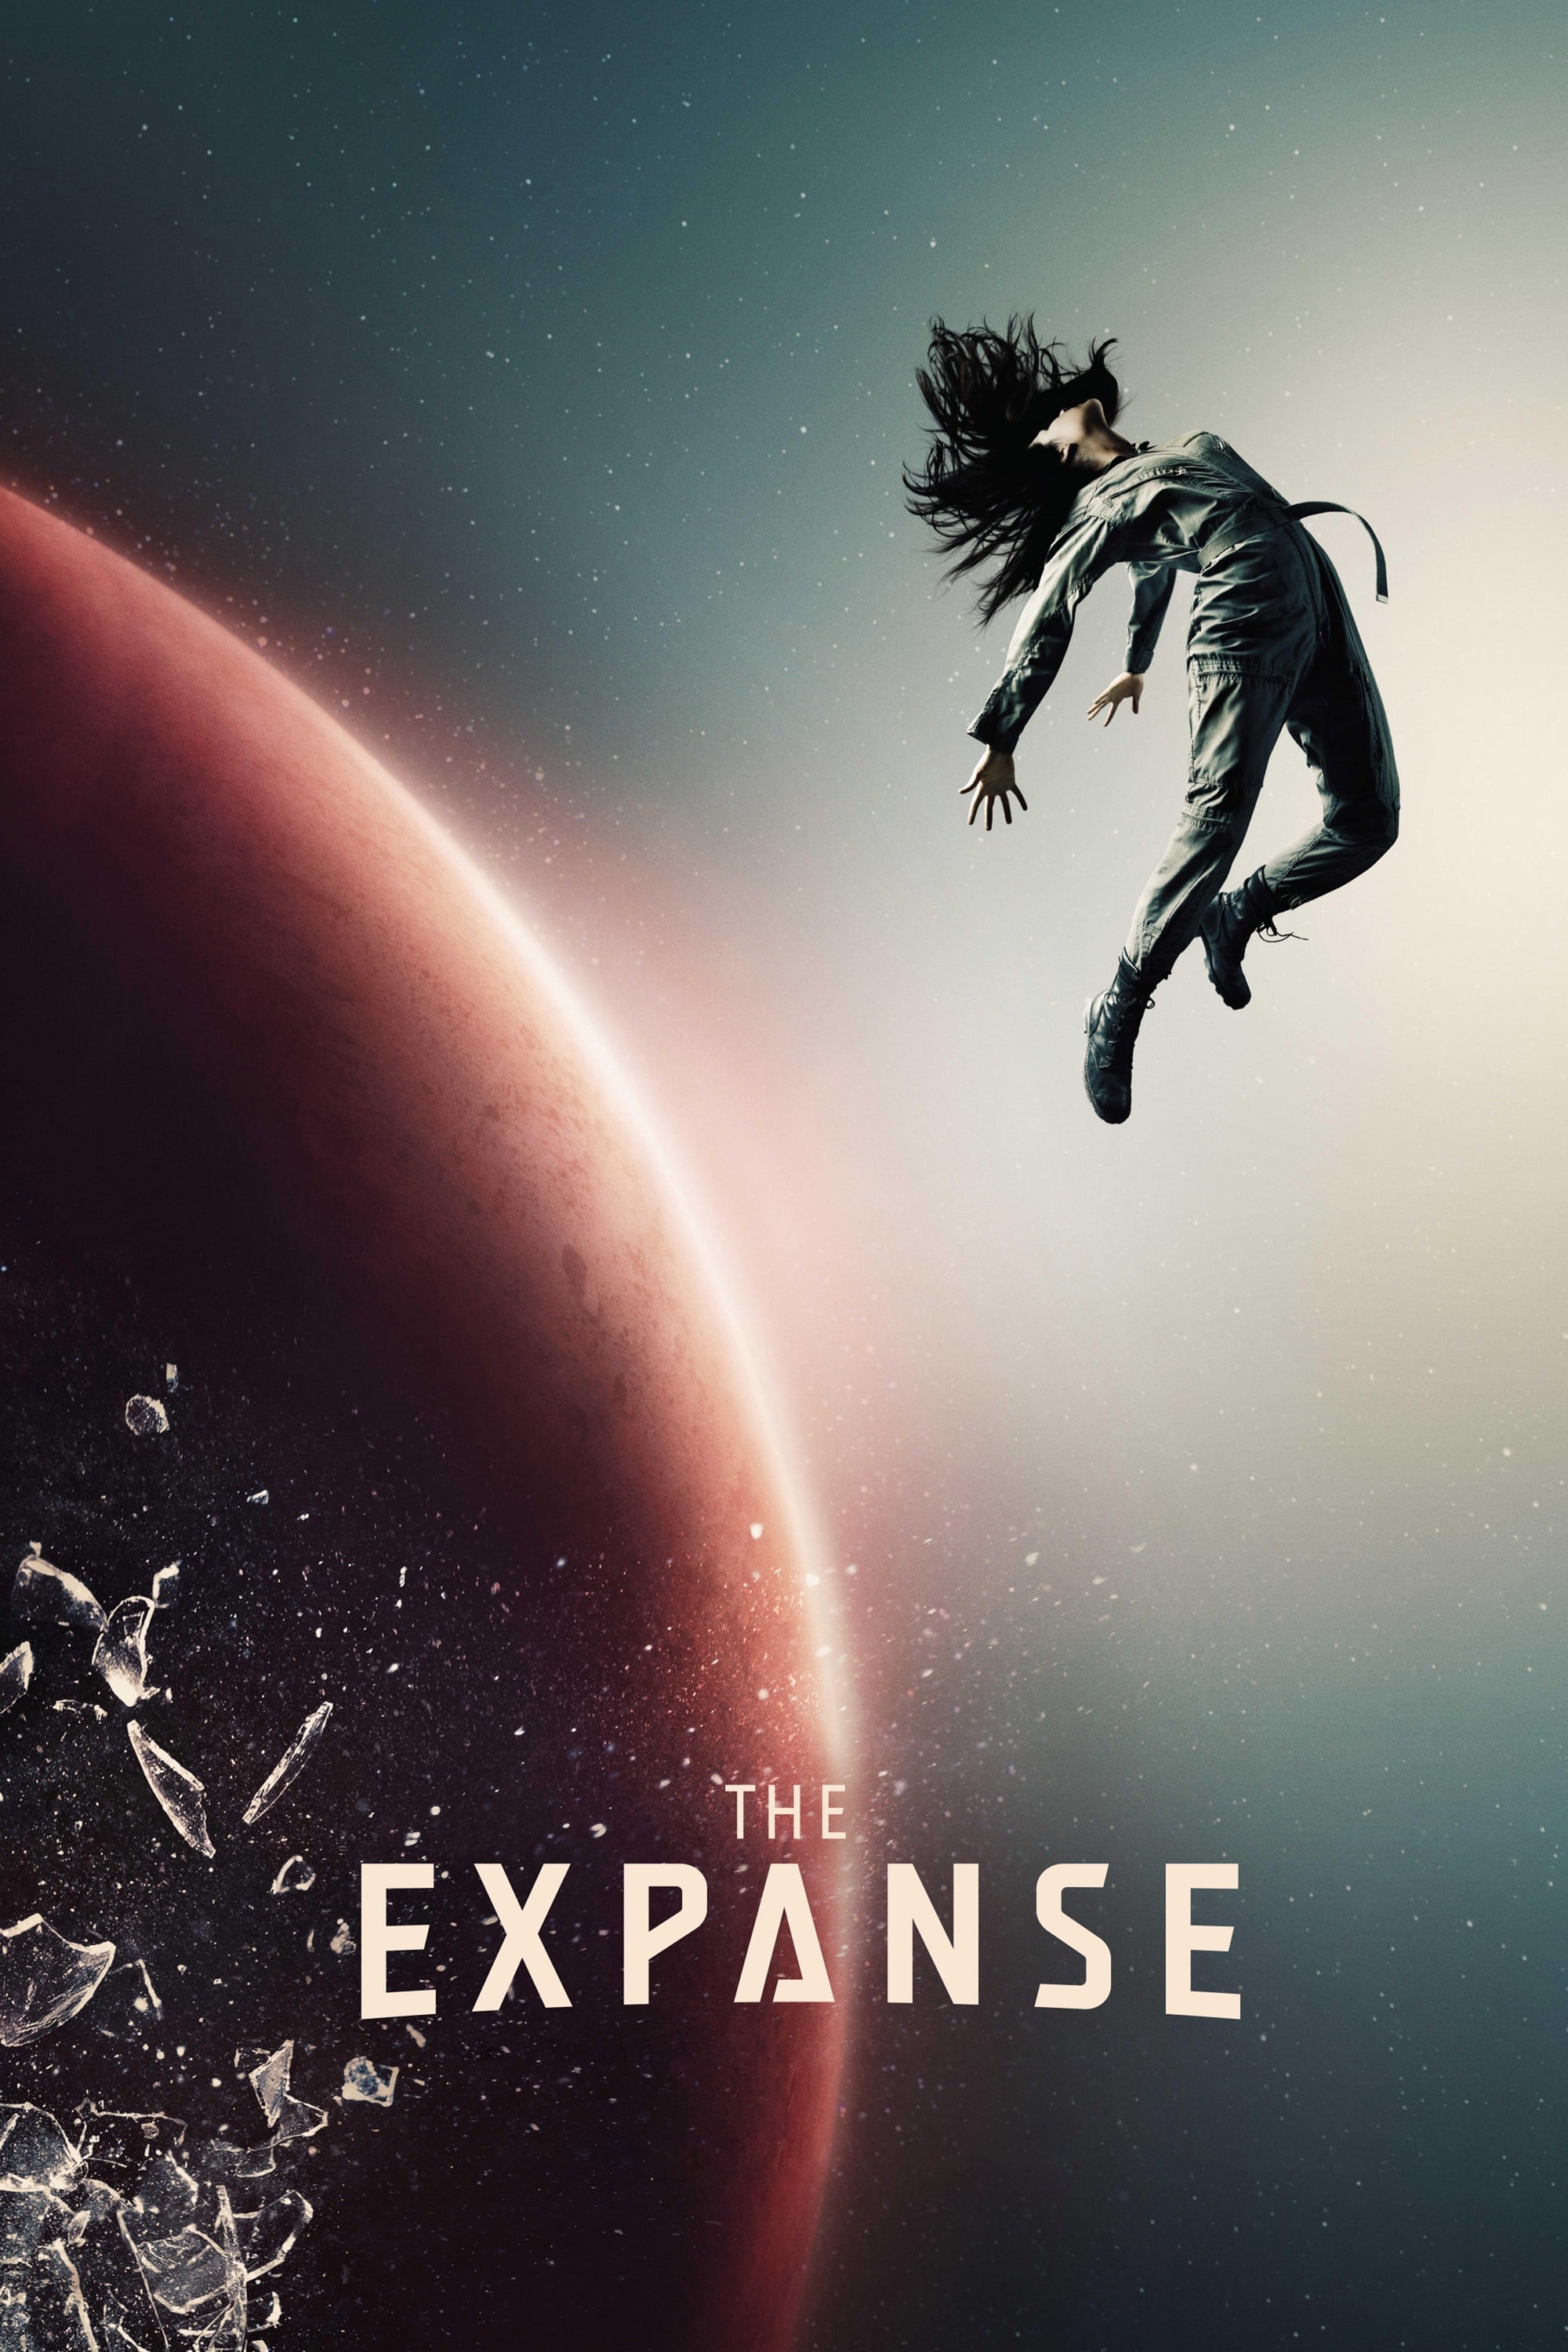 The Expanse rating